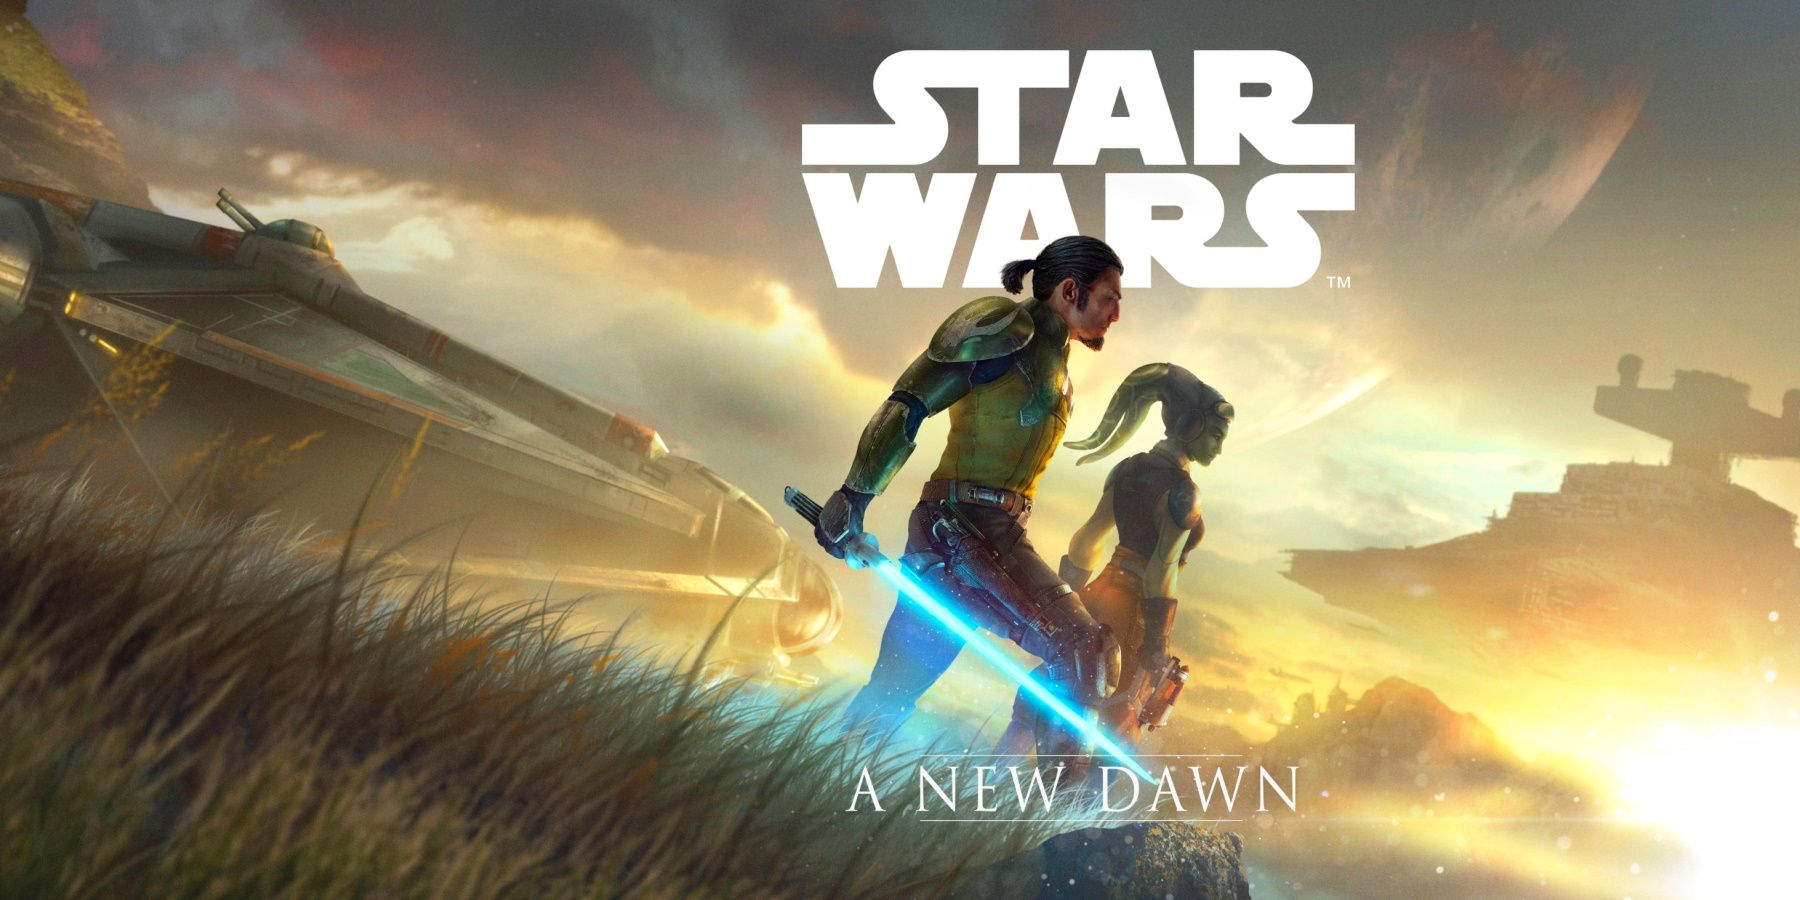 Hera Syndulla and Kana Jarus on the cover of star wars novel a new dawn